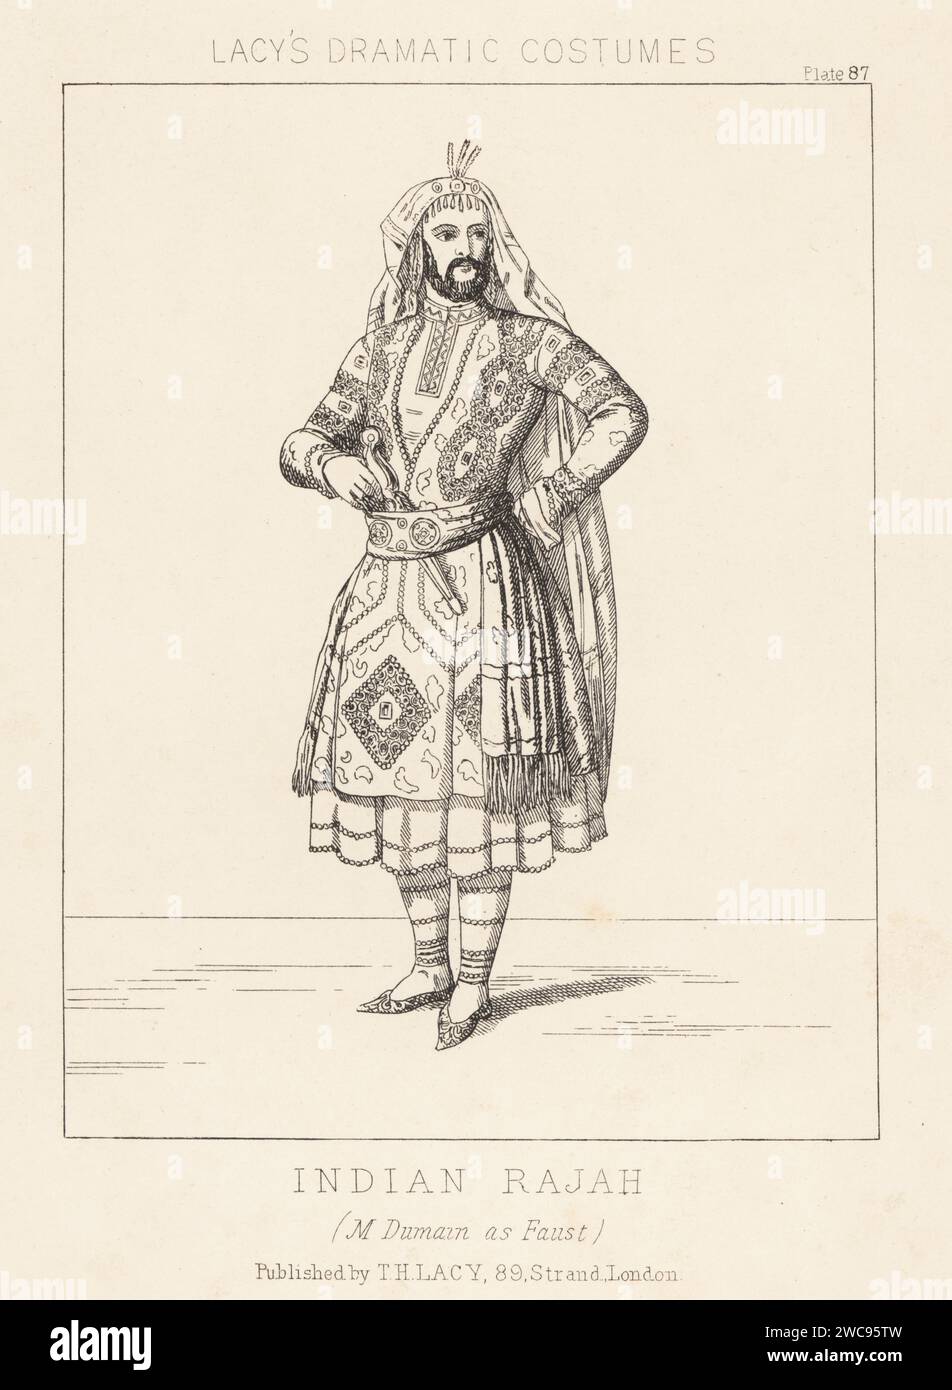 Costume of an Indian Rajah, 1858. In costume as an Indian Rajah. In headdress with long train, embroidered tunic and skirt, sash belt with pistol. (Louis-Francois) Dumaine as Faust (sic). Perhaps one of the three Indians in Adolphe d'Ennery's ballet Faust, 1858. Lithograph from Thomas Hailes Lacy's Male Costumes, Historical, National and Dramatic in 200 Plates, London, 1865. Lacy (1809-1873) was a British actor, playwright, theatrical manager and publisher. Stock Photo